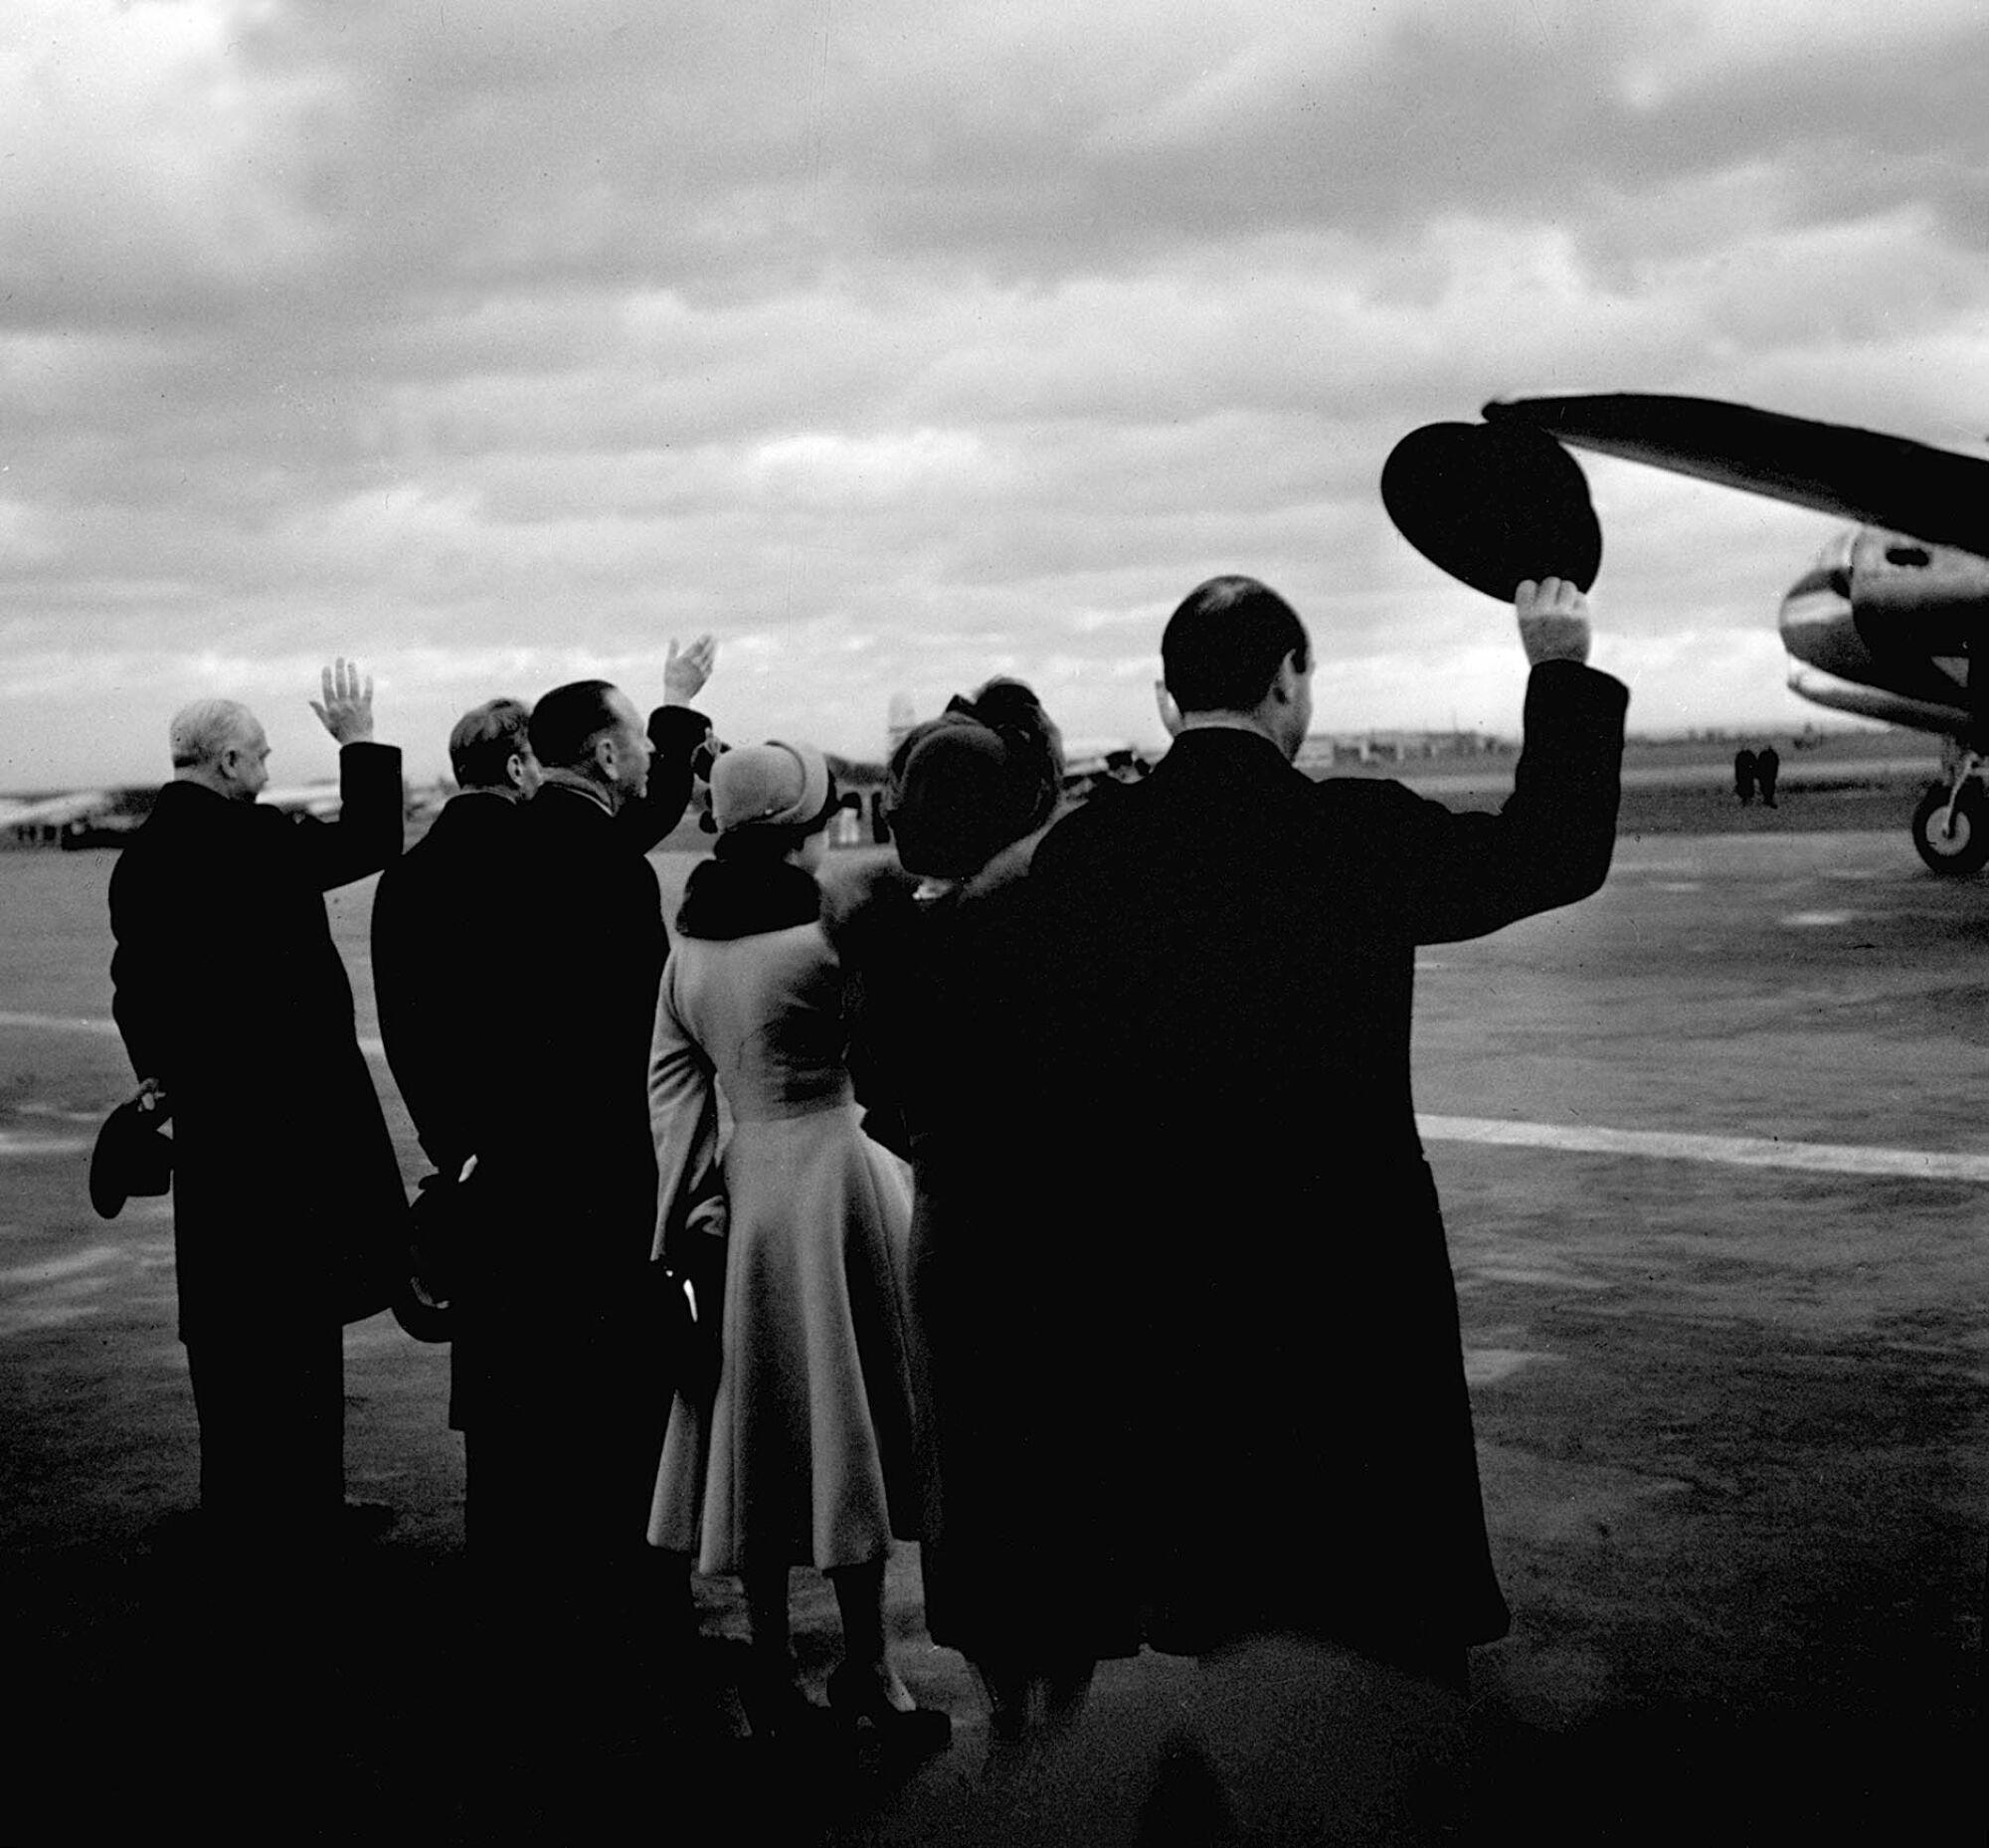 A group of men and women wave as they stand near a plane 